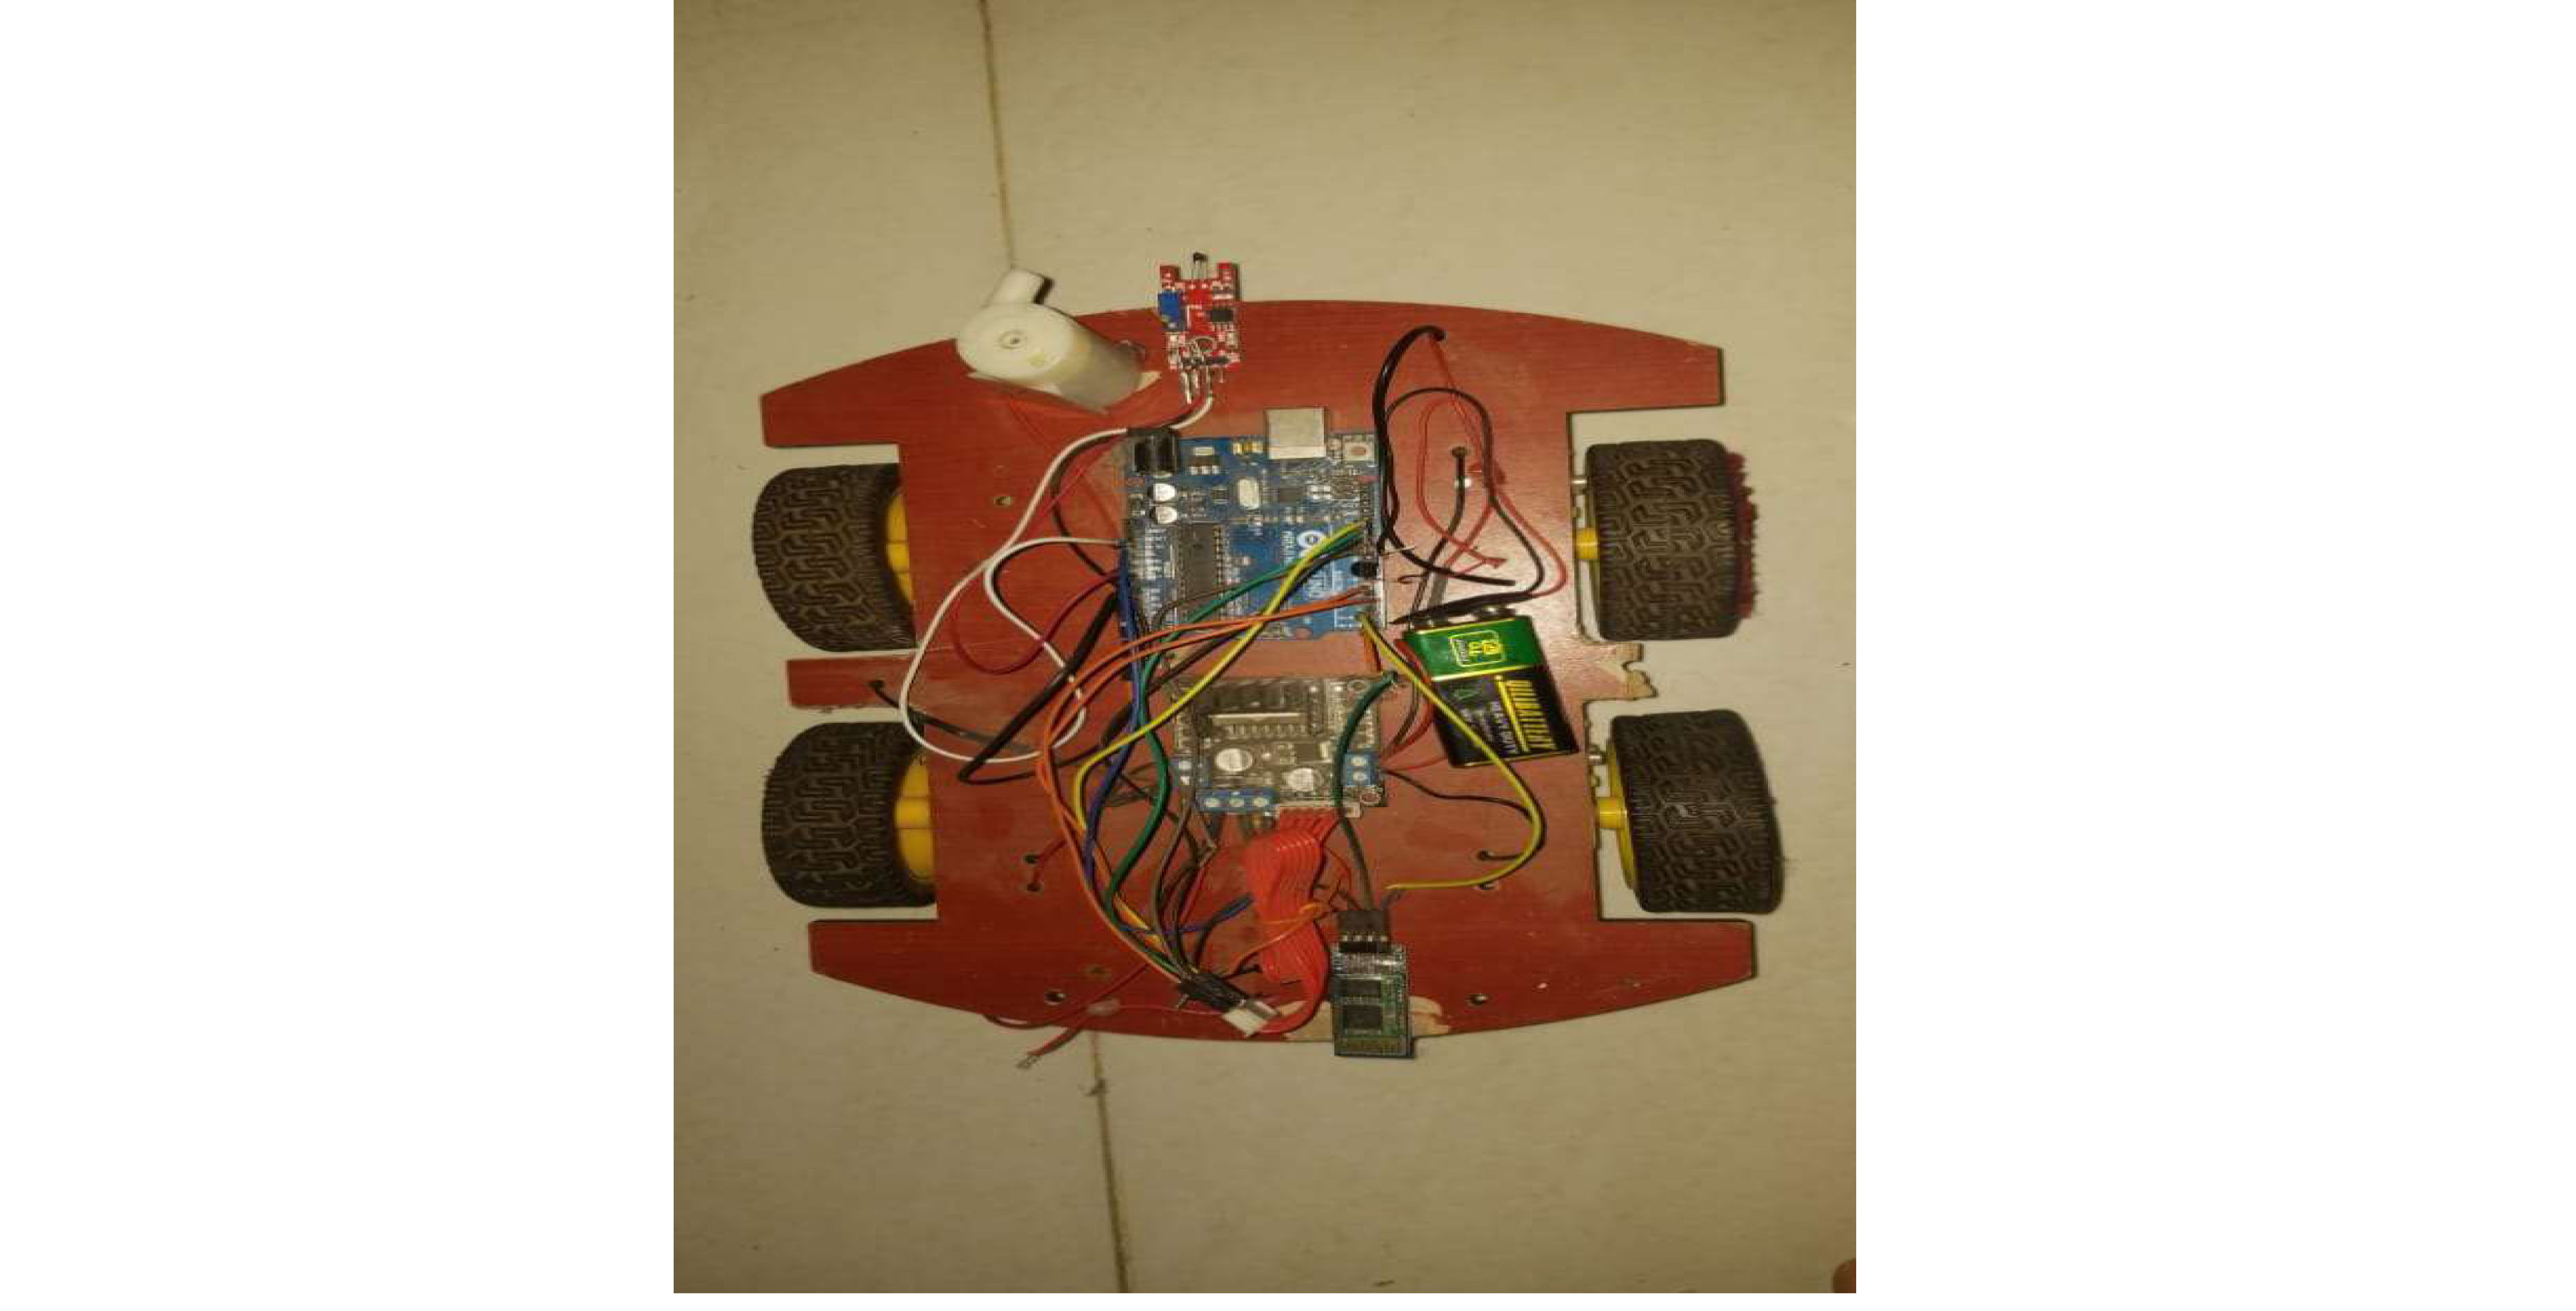 Developing a prototype of fire detection and automatic extinguisher mobile robot based on convolutional neural network